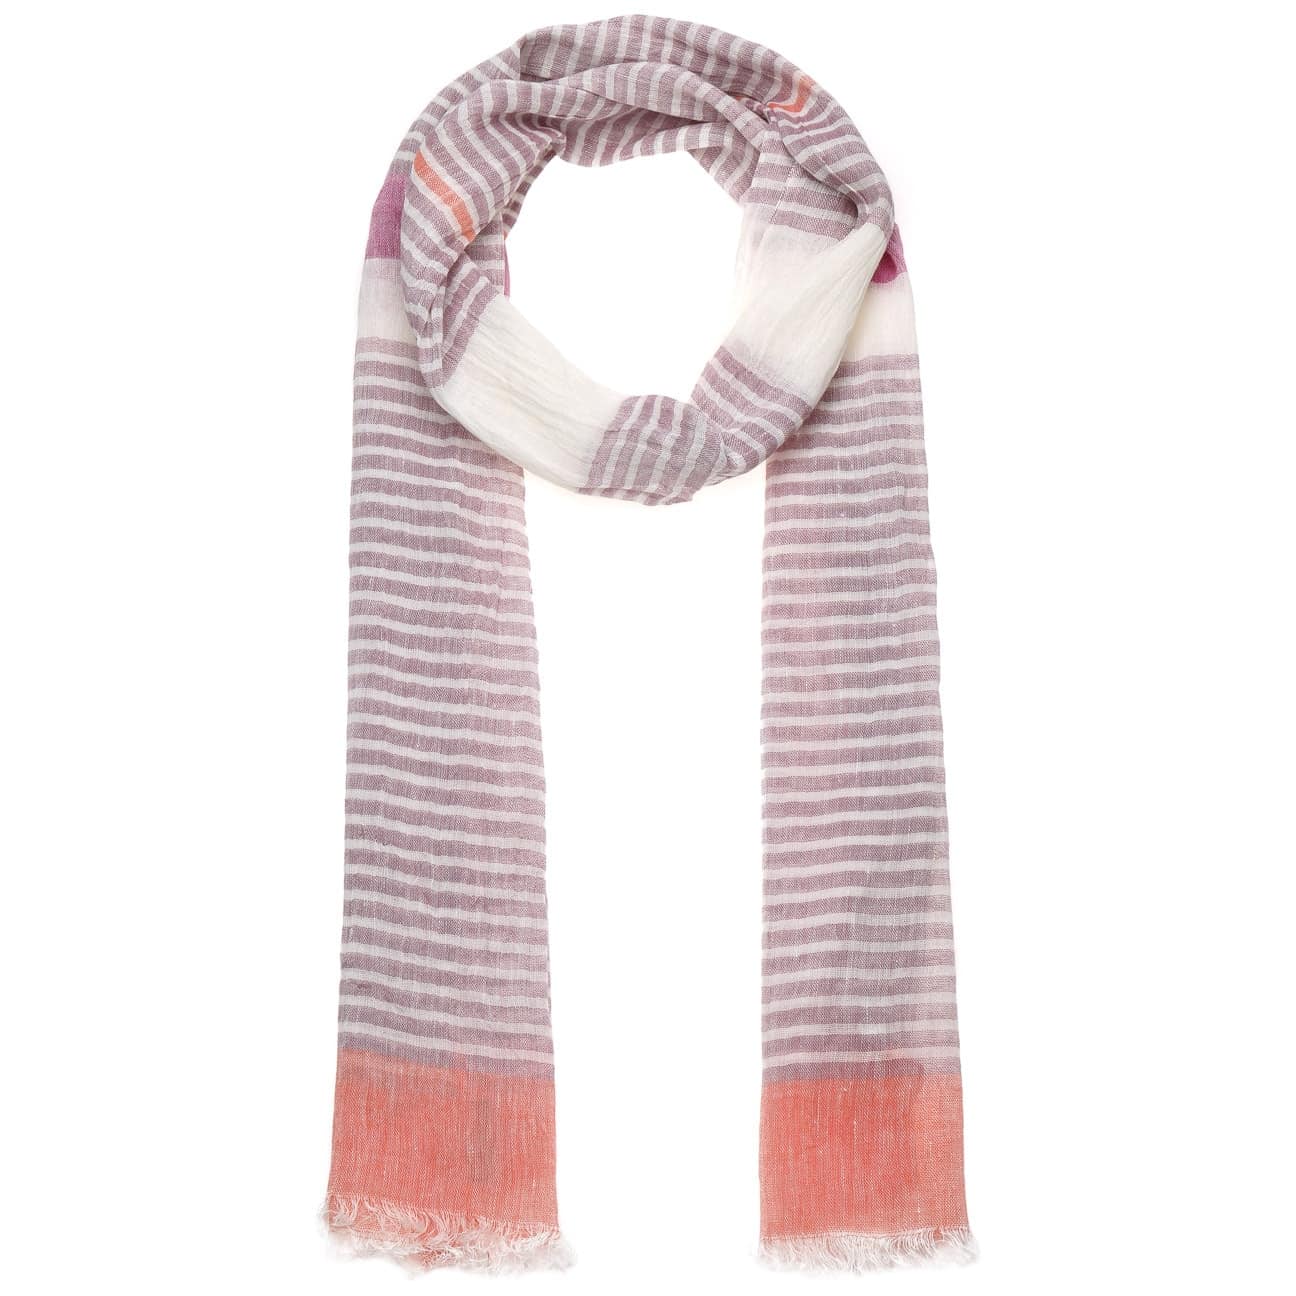 Linen Coton Stripes Scarf by Fraas - 26,95